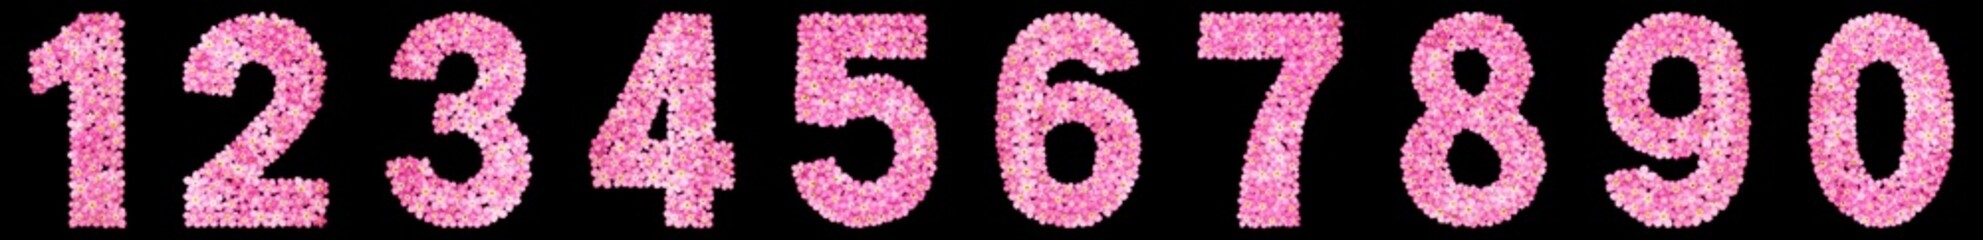 Set of arabic numbers, natural pink flowers of forget-me-not, isolated on black background